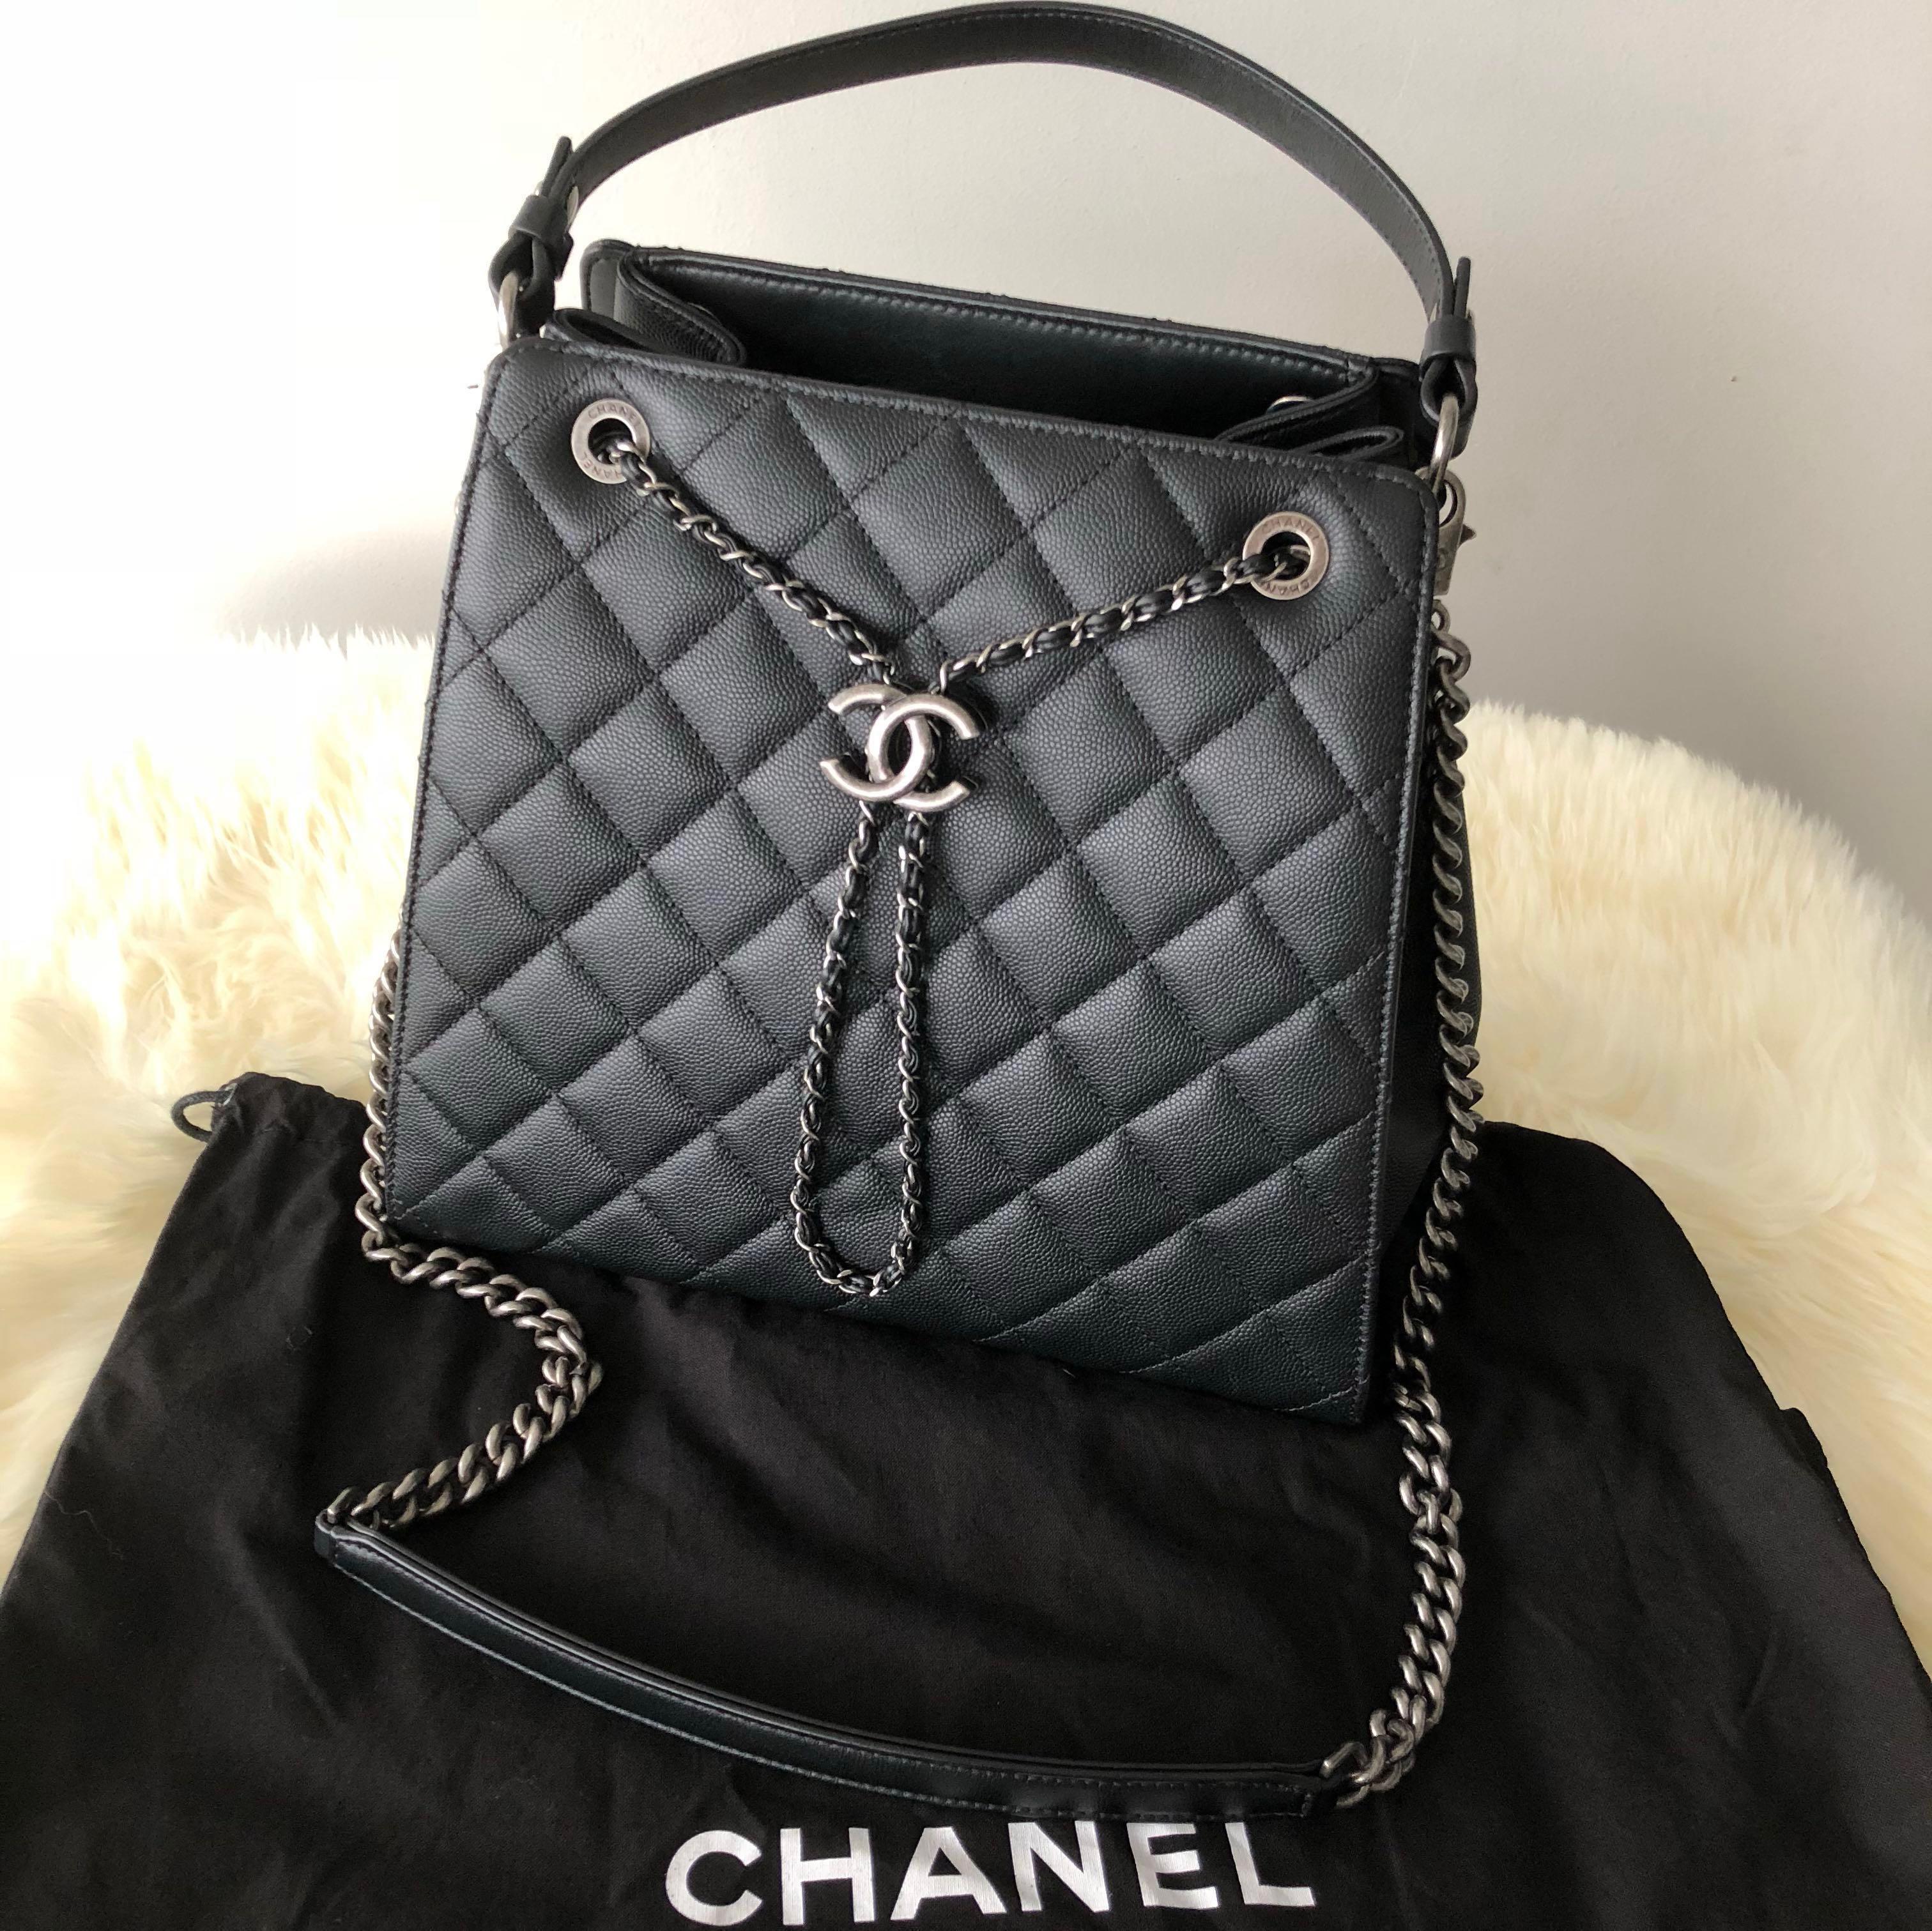 Why is Chanel bag so expensive, and so many people want it, why